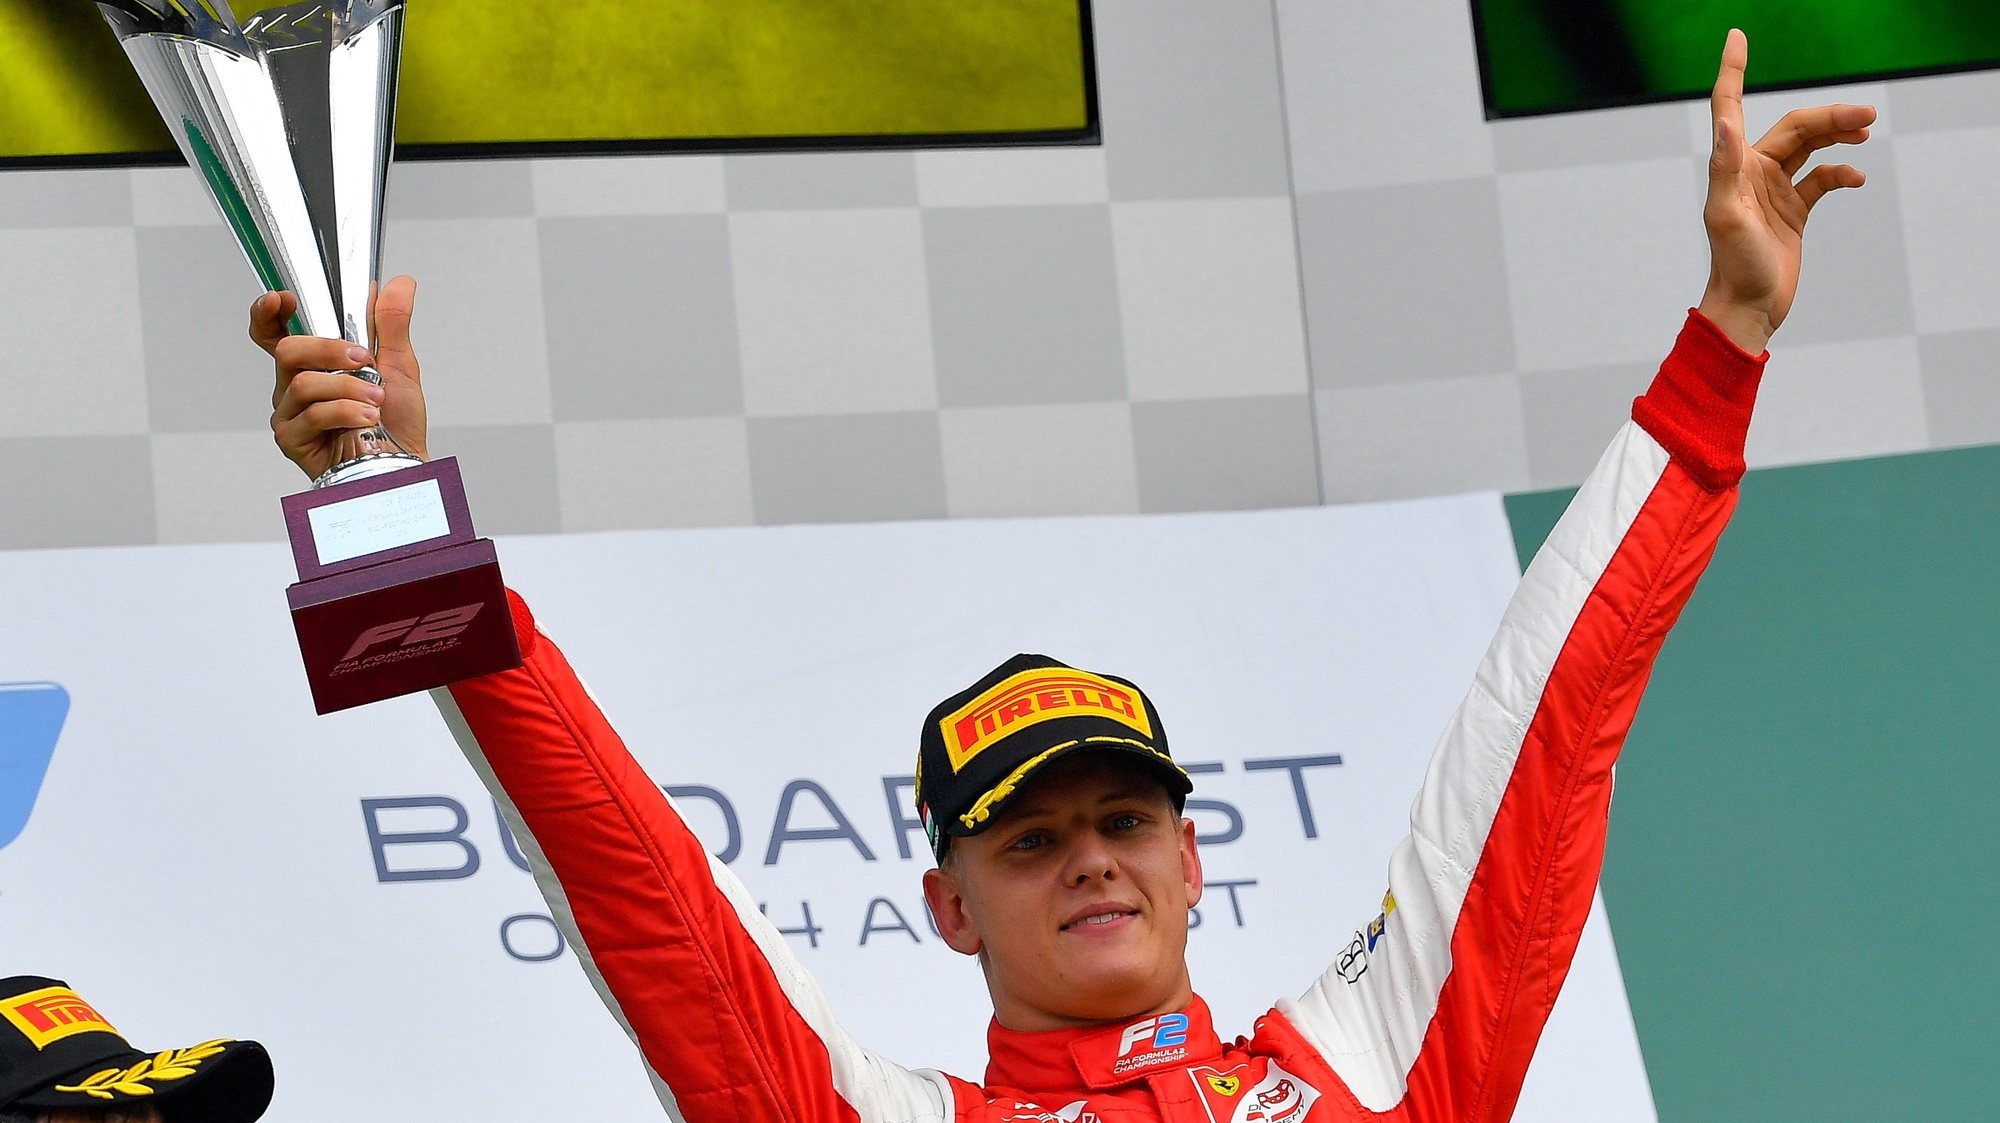 epa08856475 (FILE) Winner German Formula Two driver Mick Schumacher of PREMA Racing celebrates his victory after the second race of the Formula-2 at the Hungaroring circuit, in Mogyorod, Hungary, 04 August 2019.  (reissued 02 December 2020). Mick Schumacher, the son of seven-time Formula 1 world champion Michael, has signed to race for F1 team Haas next season, it was announced 02 December 2020.  EPA/Zsolt Czegledi HUNGARY OUT *** Local Caption *** 55377885